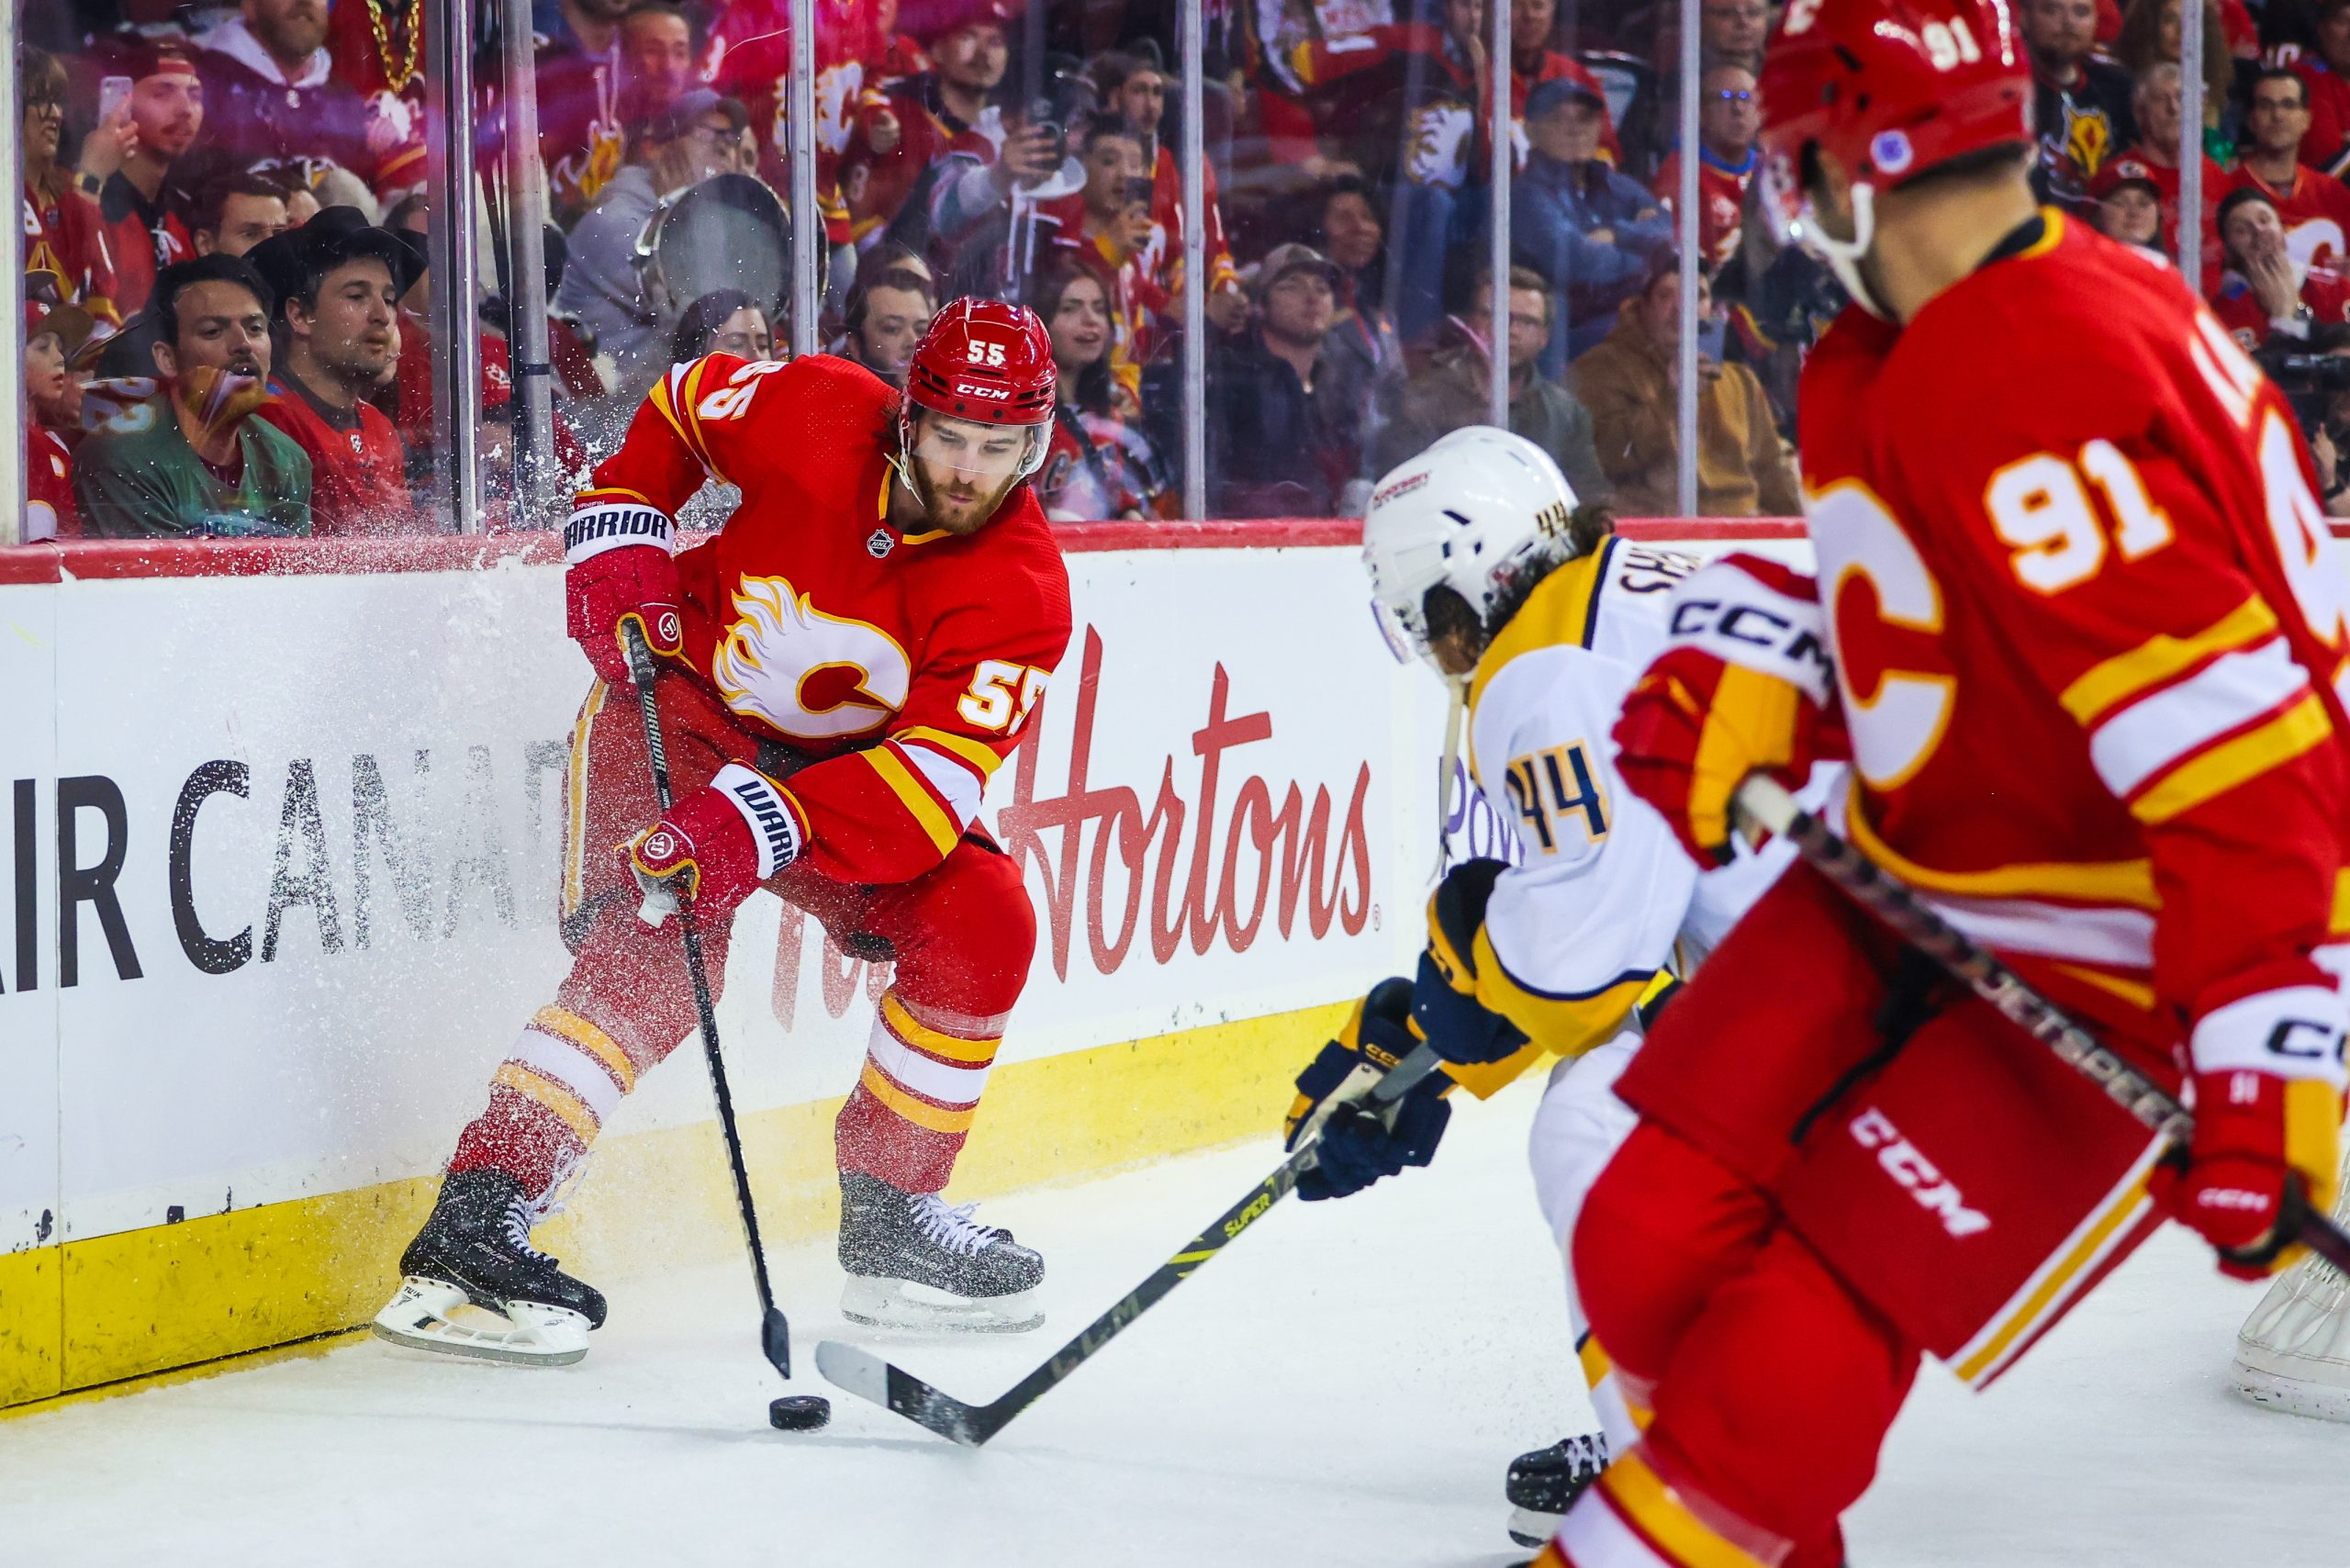 Calgary Flames New Arena Deal Secured - Last Word On Hockey